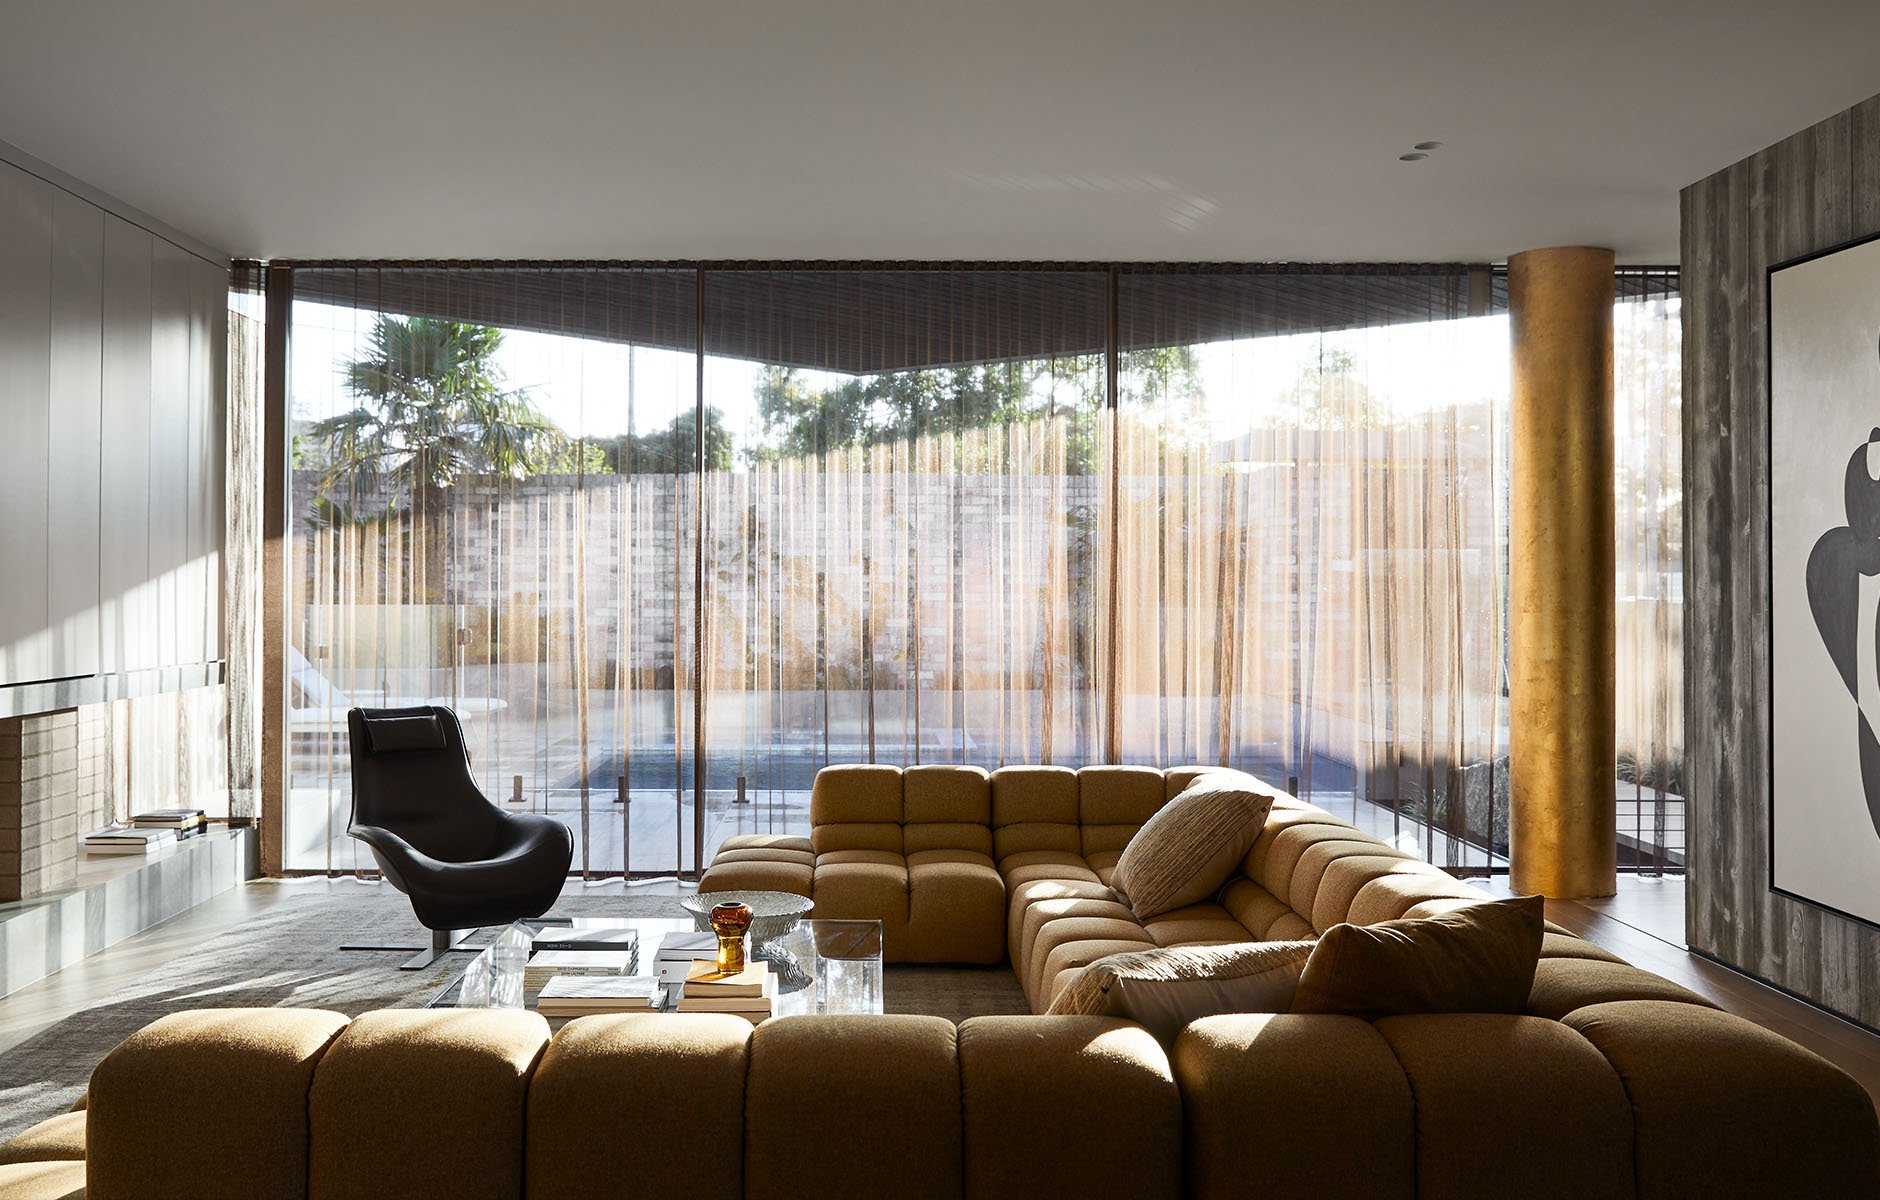 The Brighton Residence by Golden features the Tufty-Time Sofa, Alanda coffee table and the Mart armchair, all by B&B Italia. Photos c/o Golden.